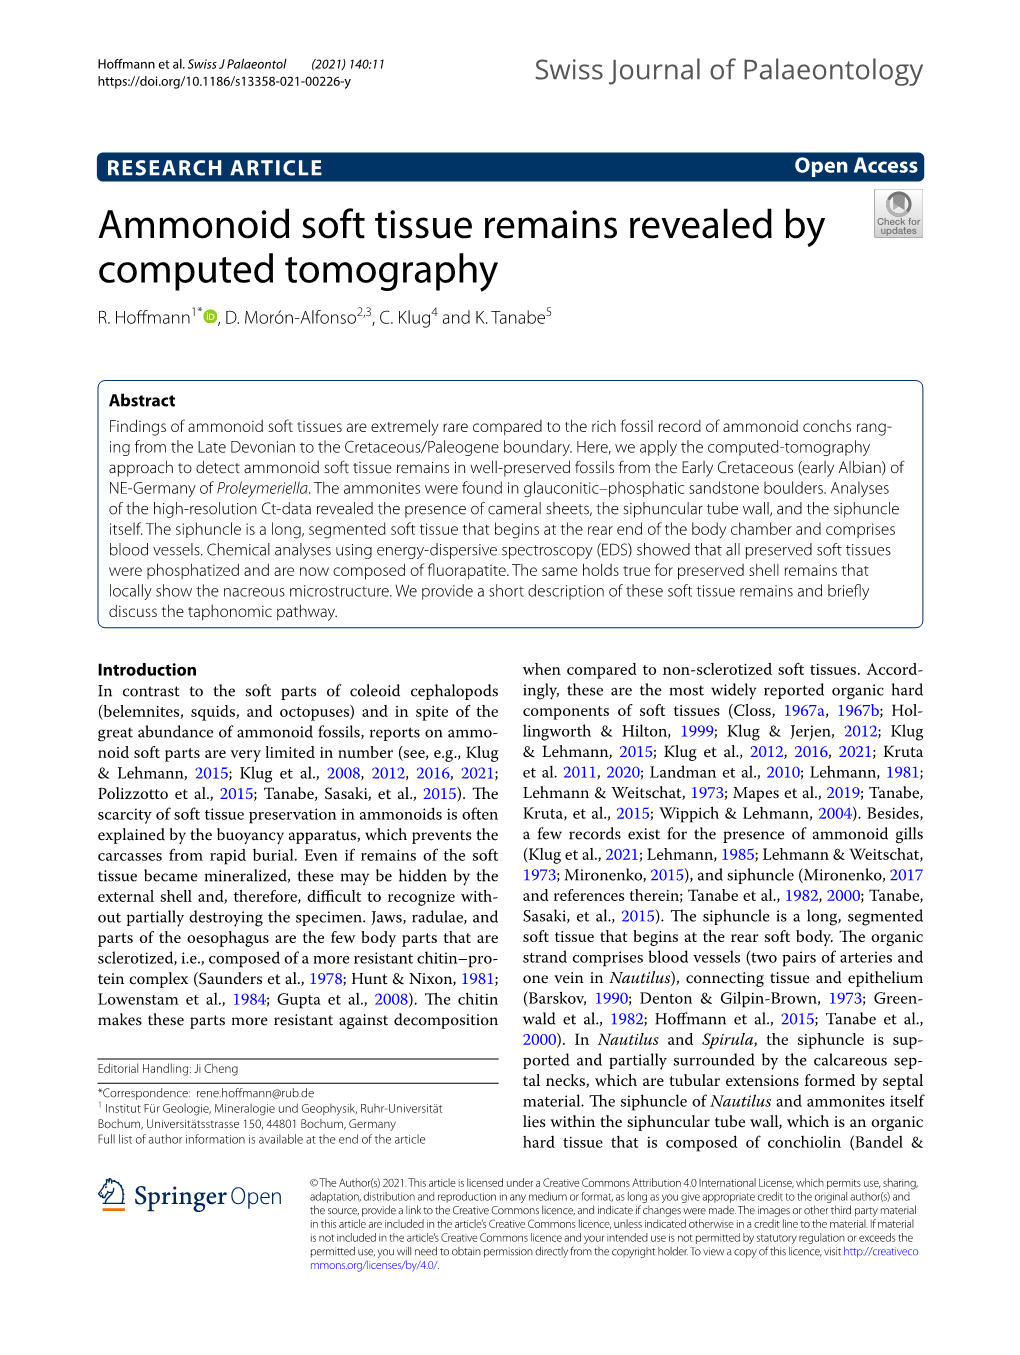 Ammonoid Soft Tissue Remains Revealed by Computed Tomography R